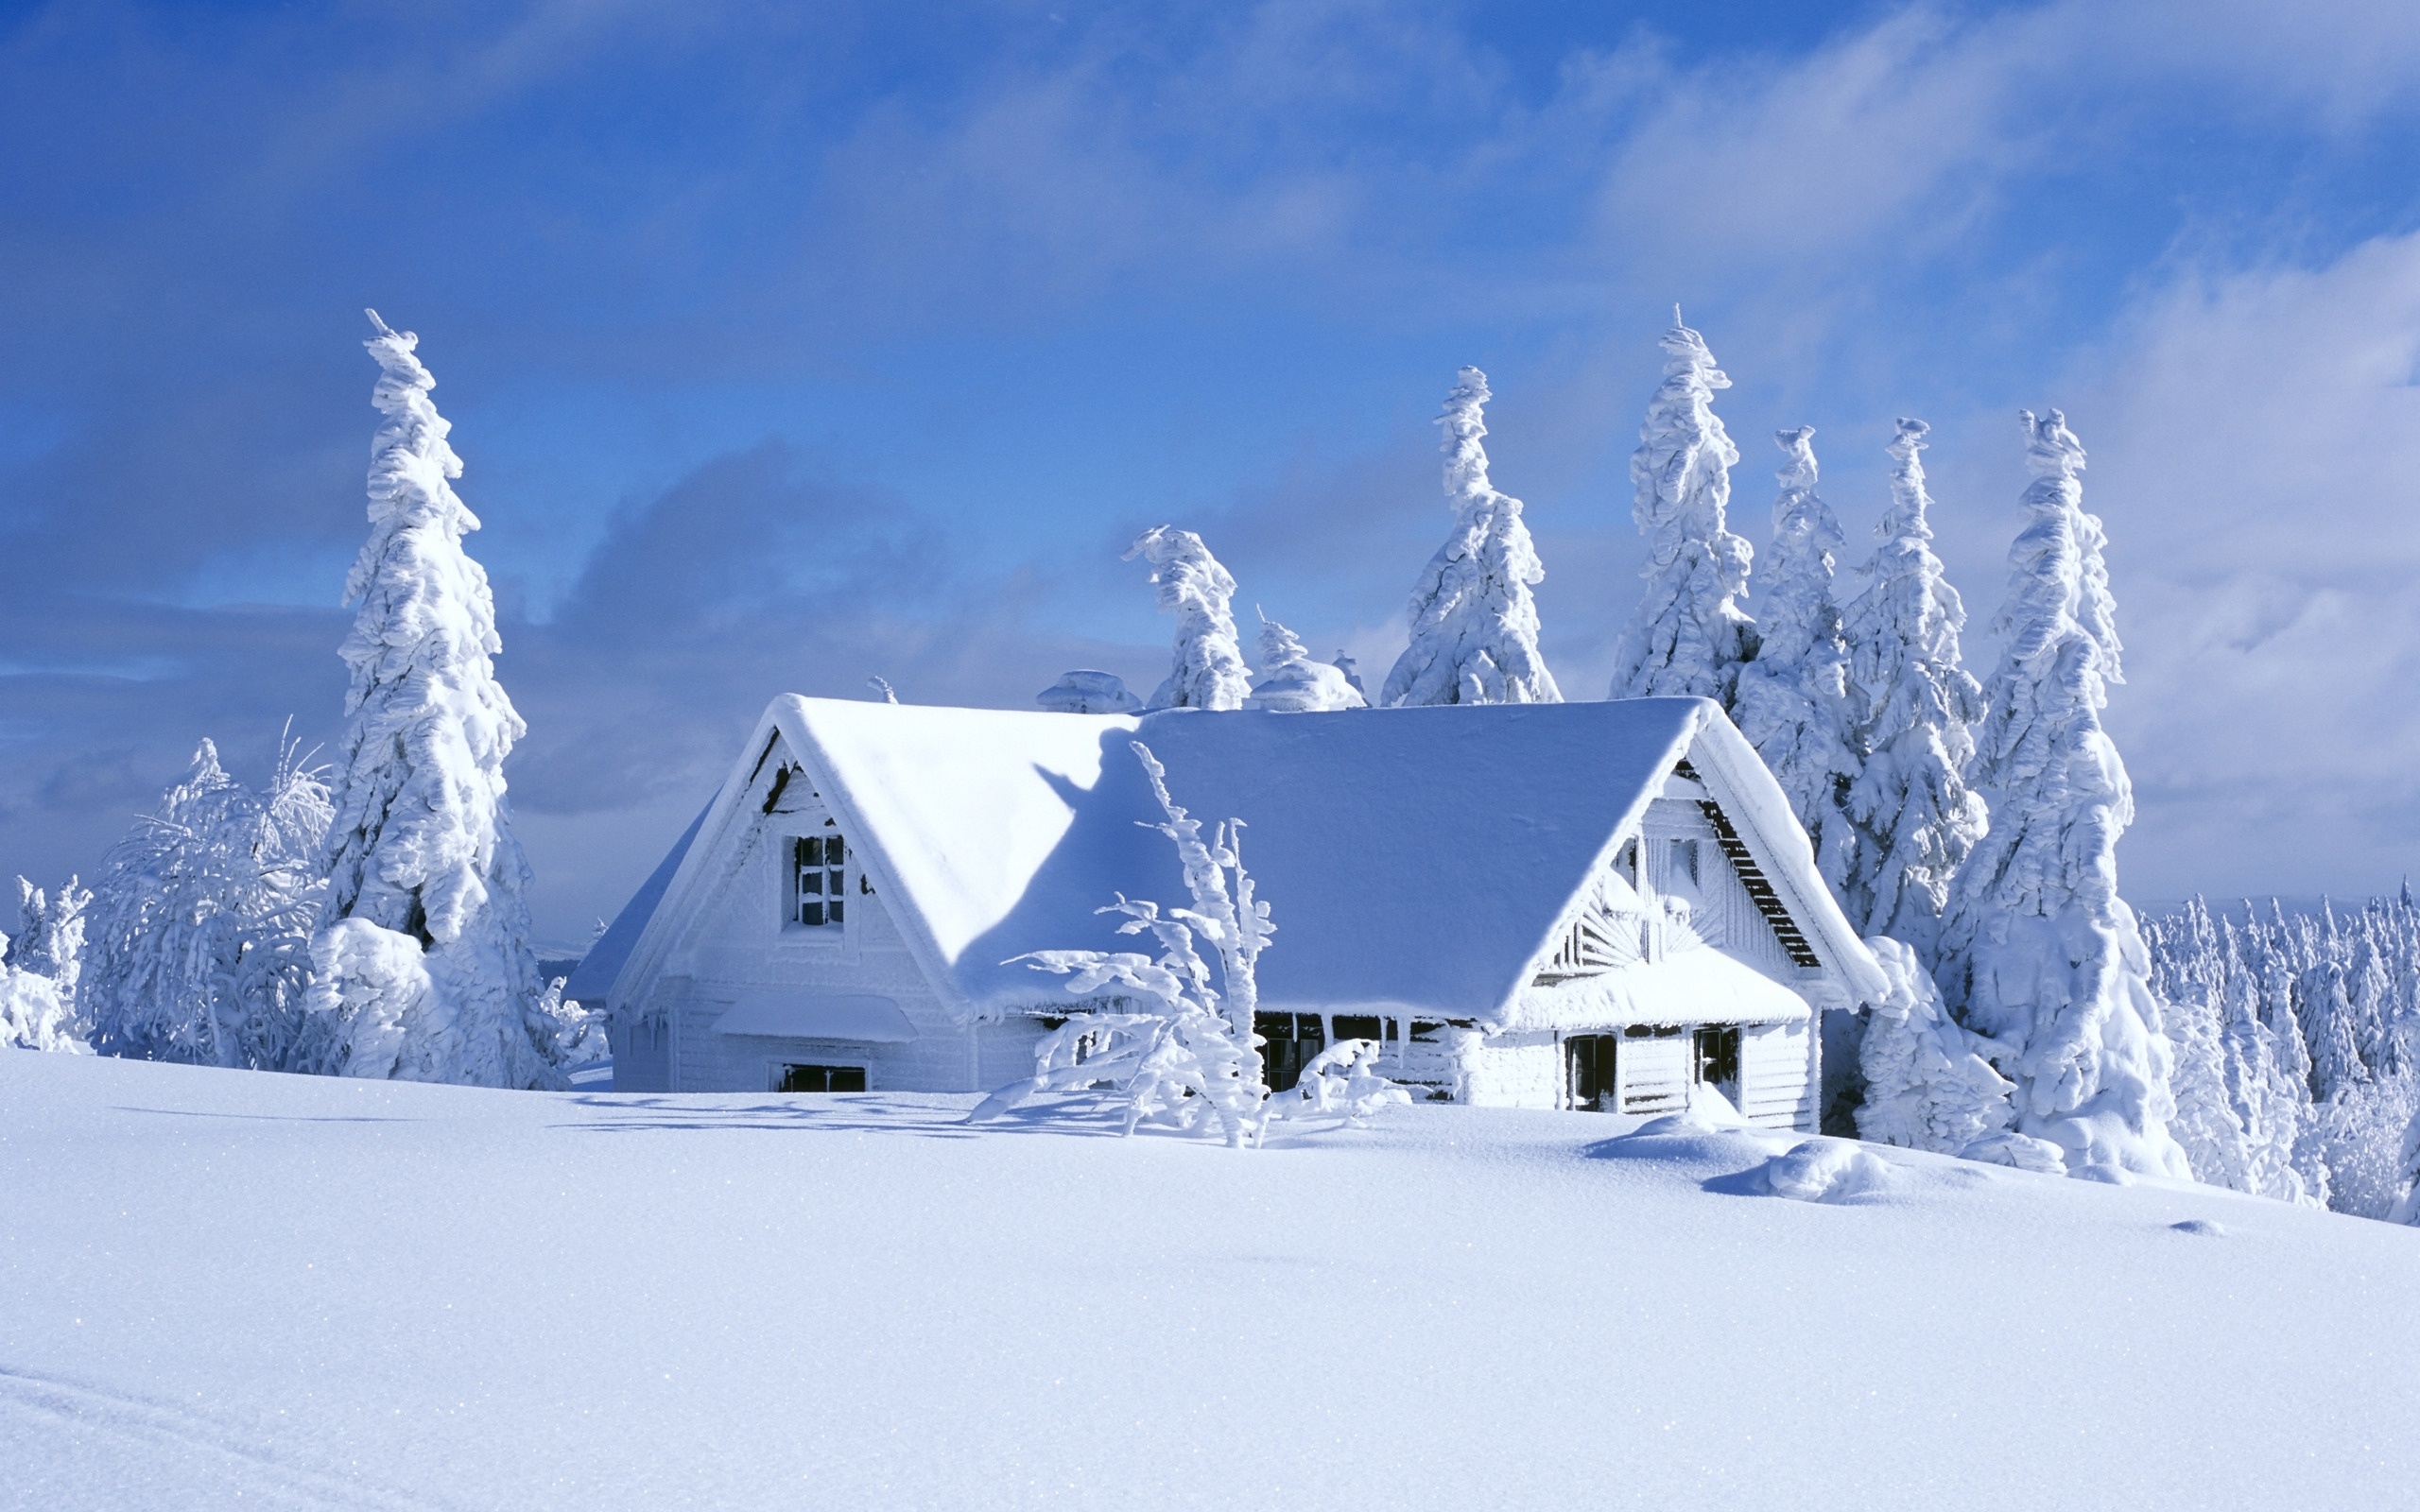 House Covered In Snow wallpaper High Quality WallpapersWallpaper